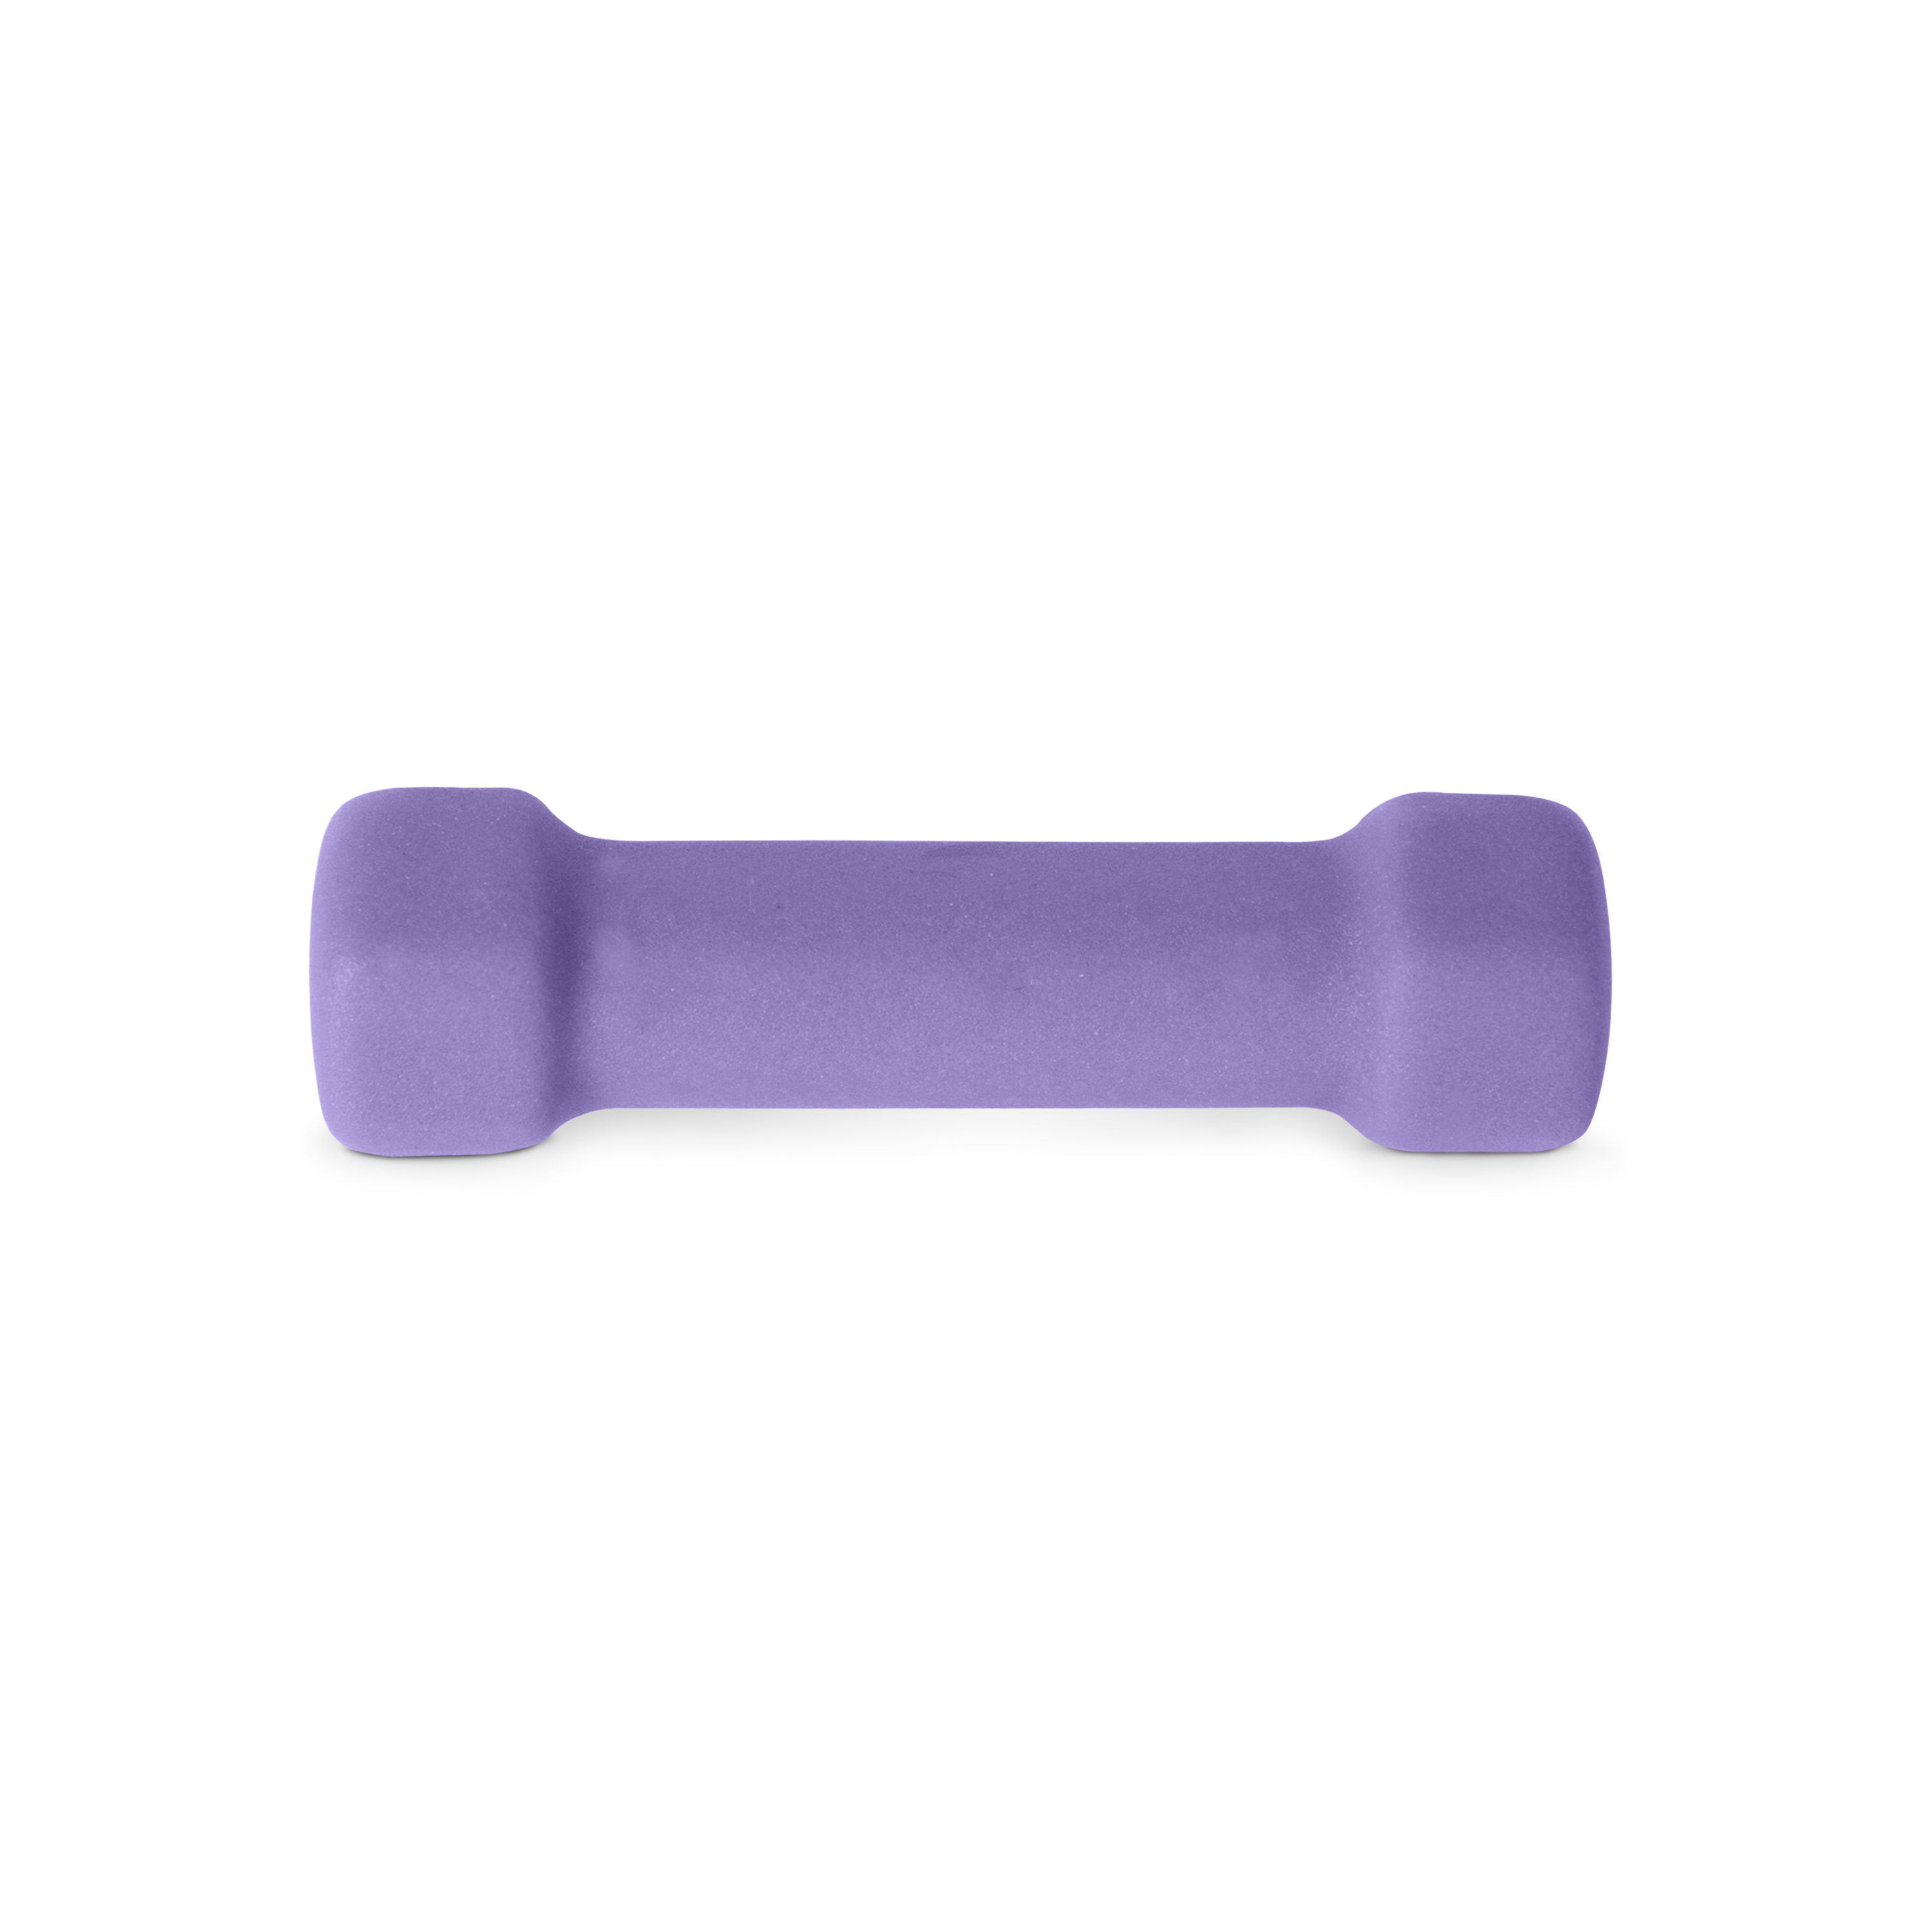 CAP Barbell Neoprene Dumbbell (Available in 1 Lb. - 9 Lbs.), Single - image 4 of 5